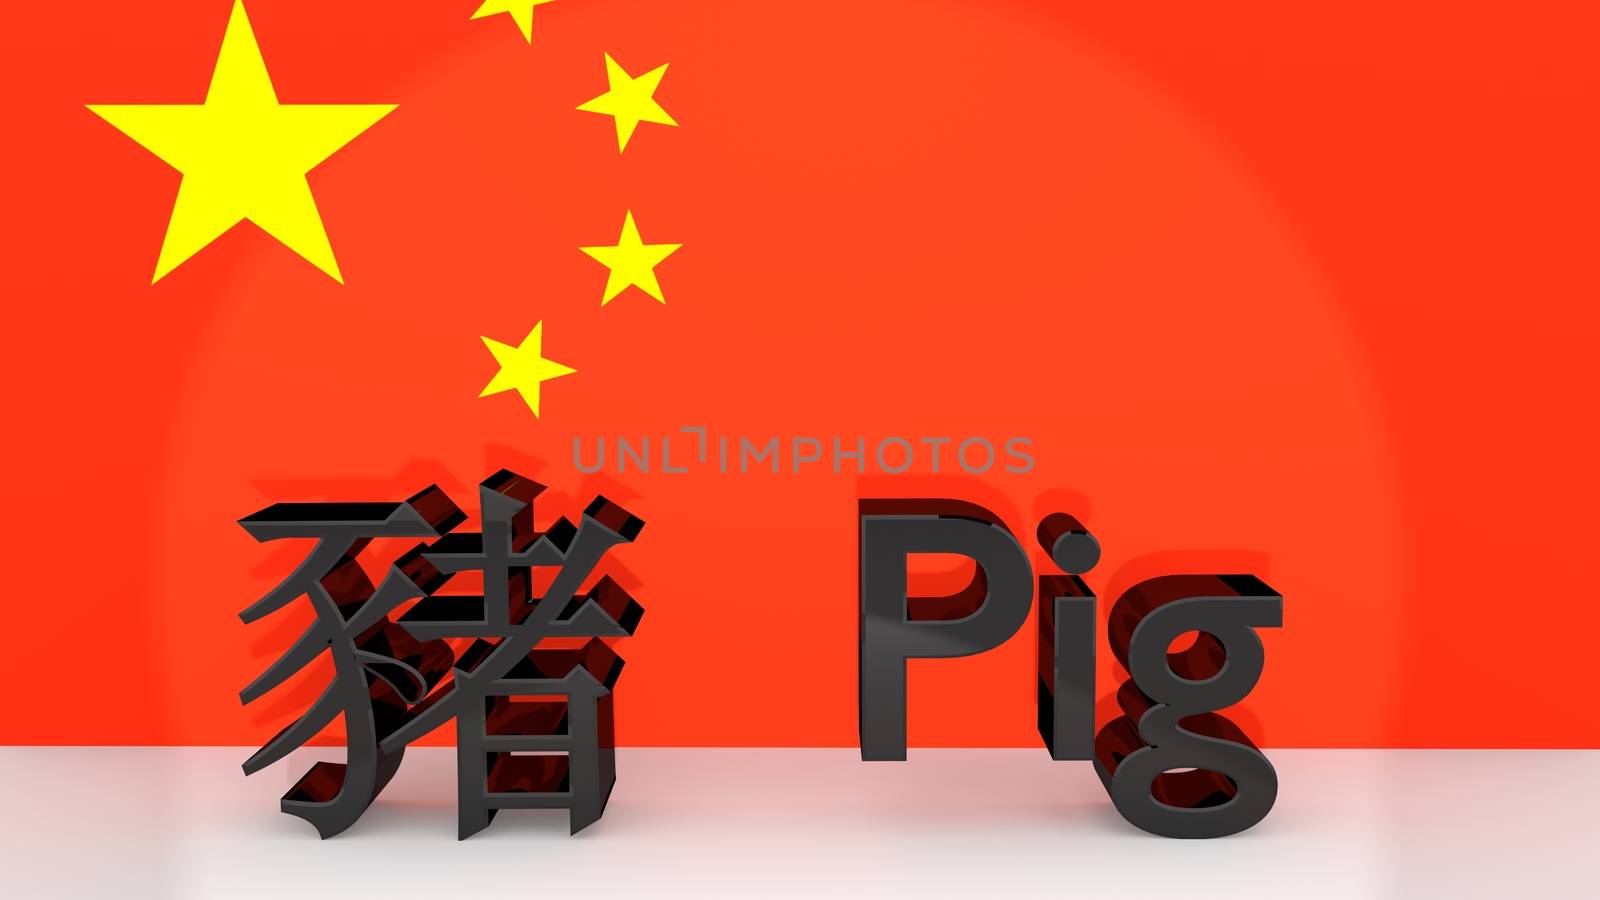 Chinese characters for the zodiac sign Pig with english translation made of dark metal in front on a chinese flag.